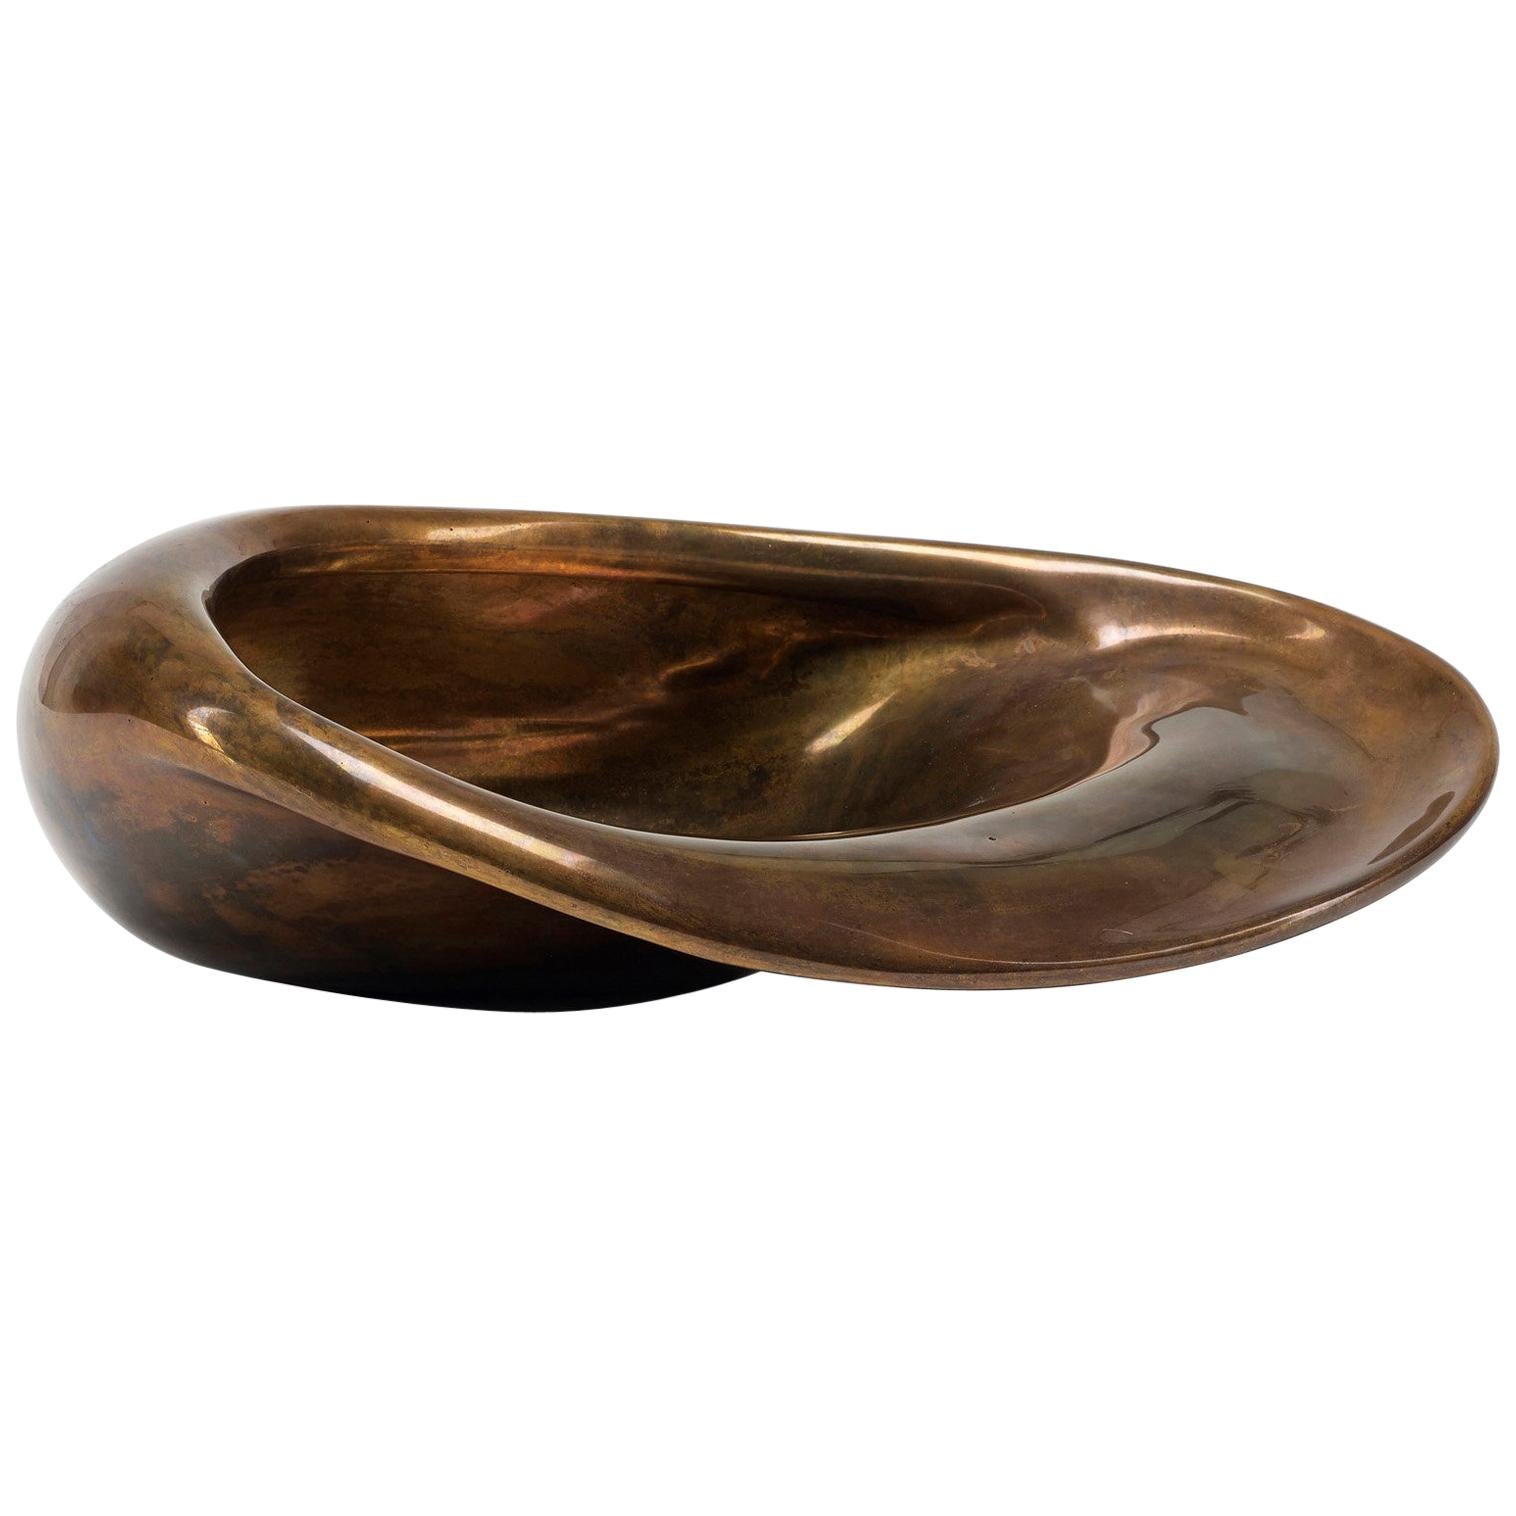 H57 Bowl or Vase in Polished Recycled Cast Red Bronze, by Jordan Mozer, USA 2007 For Sale 7